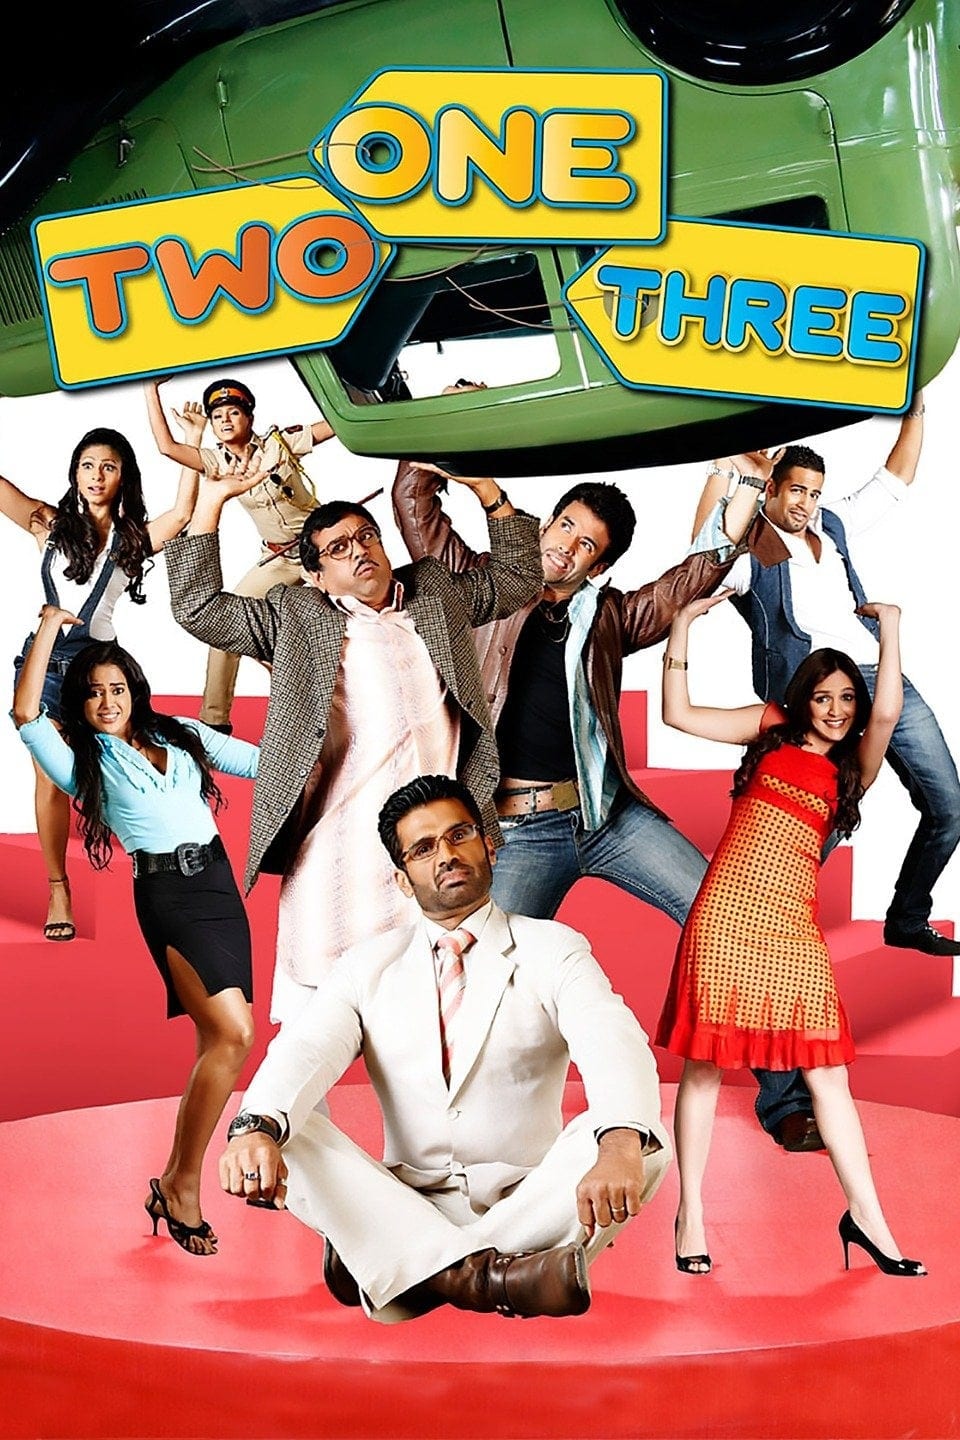 Poster for the movie "One Two Three"